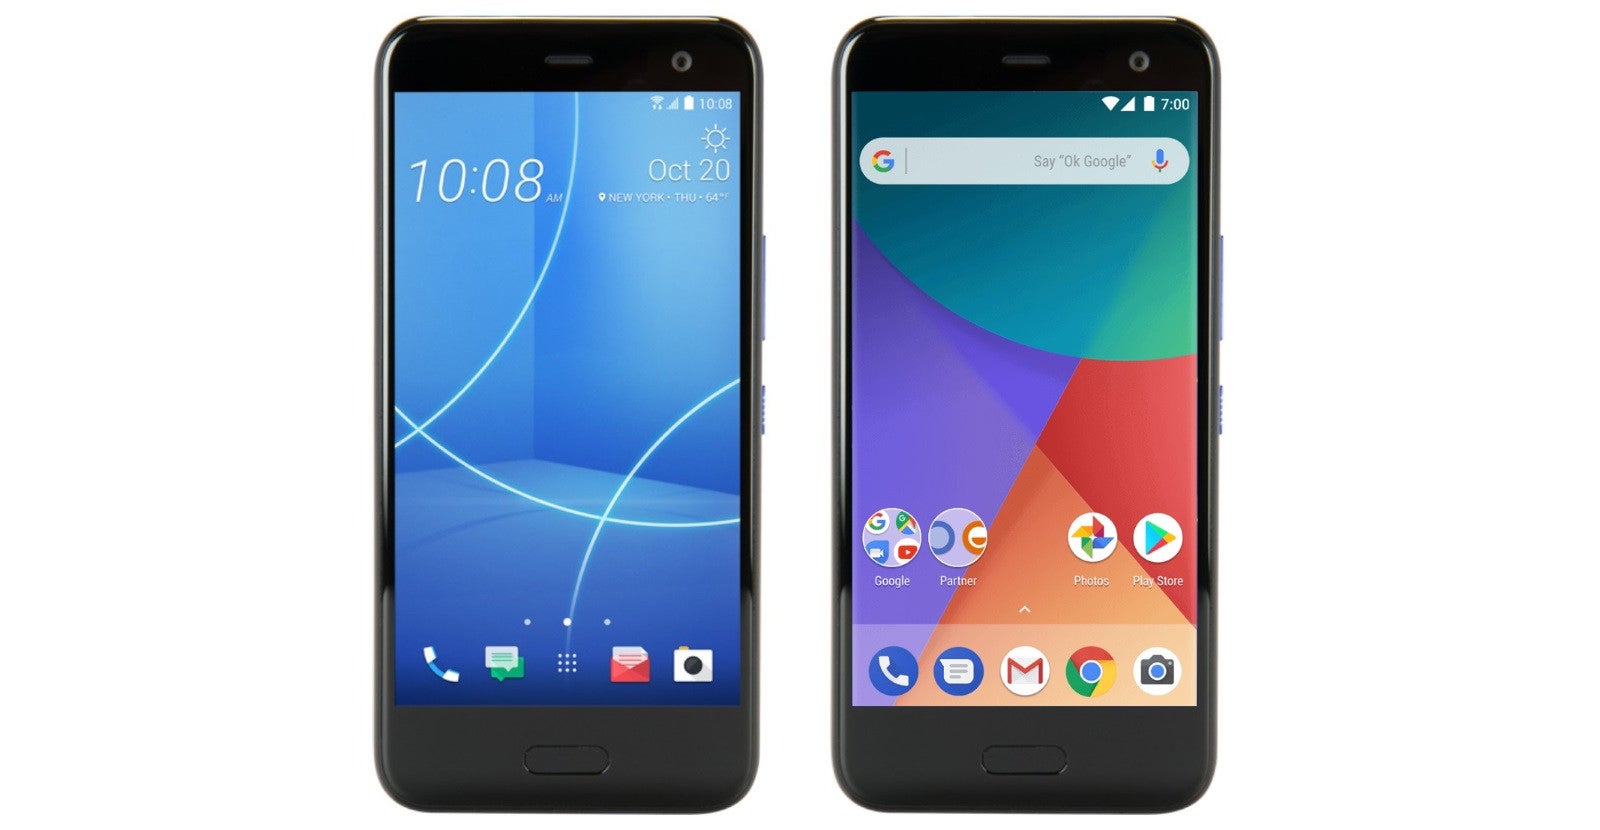 The U11 Life both in its regular and Android One variants - Specs for HTC's upcoming Android One device, the U11 Life, show up online